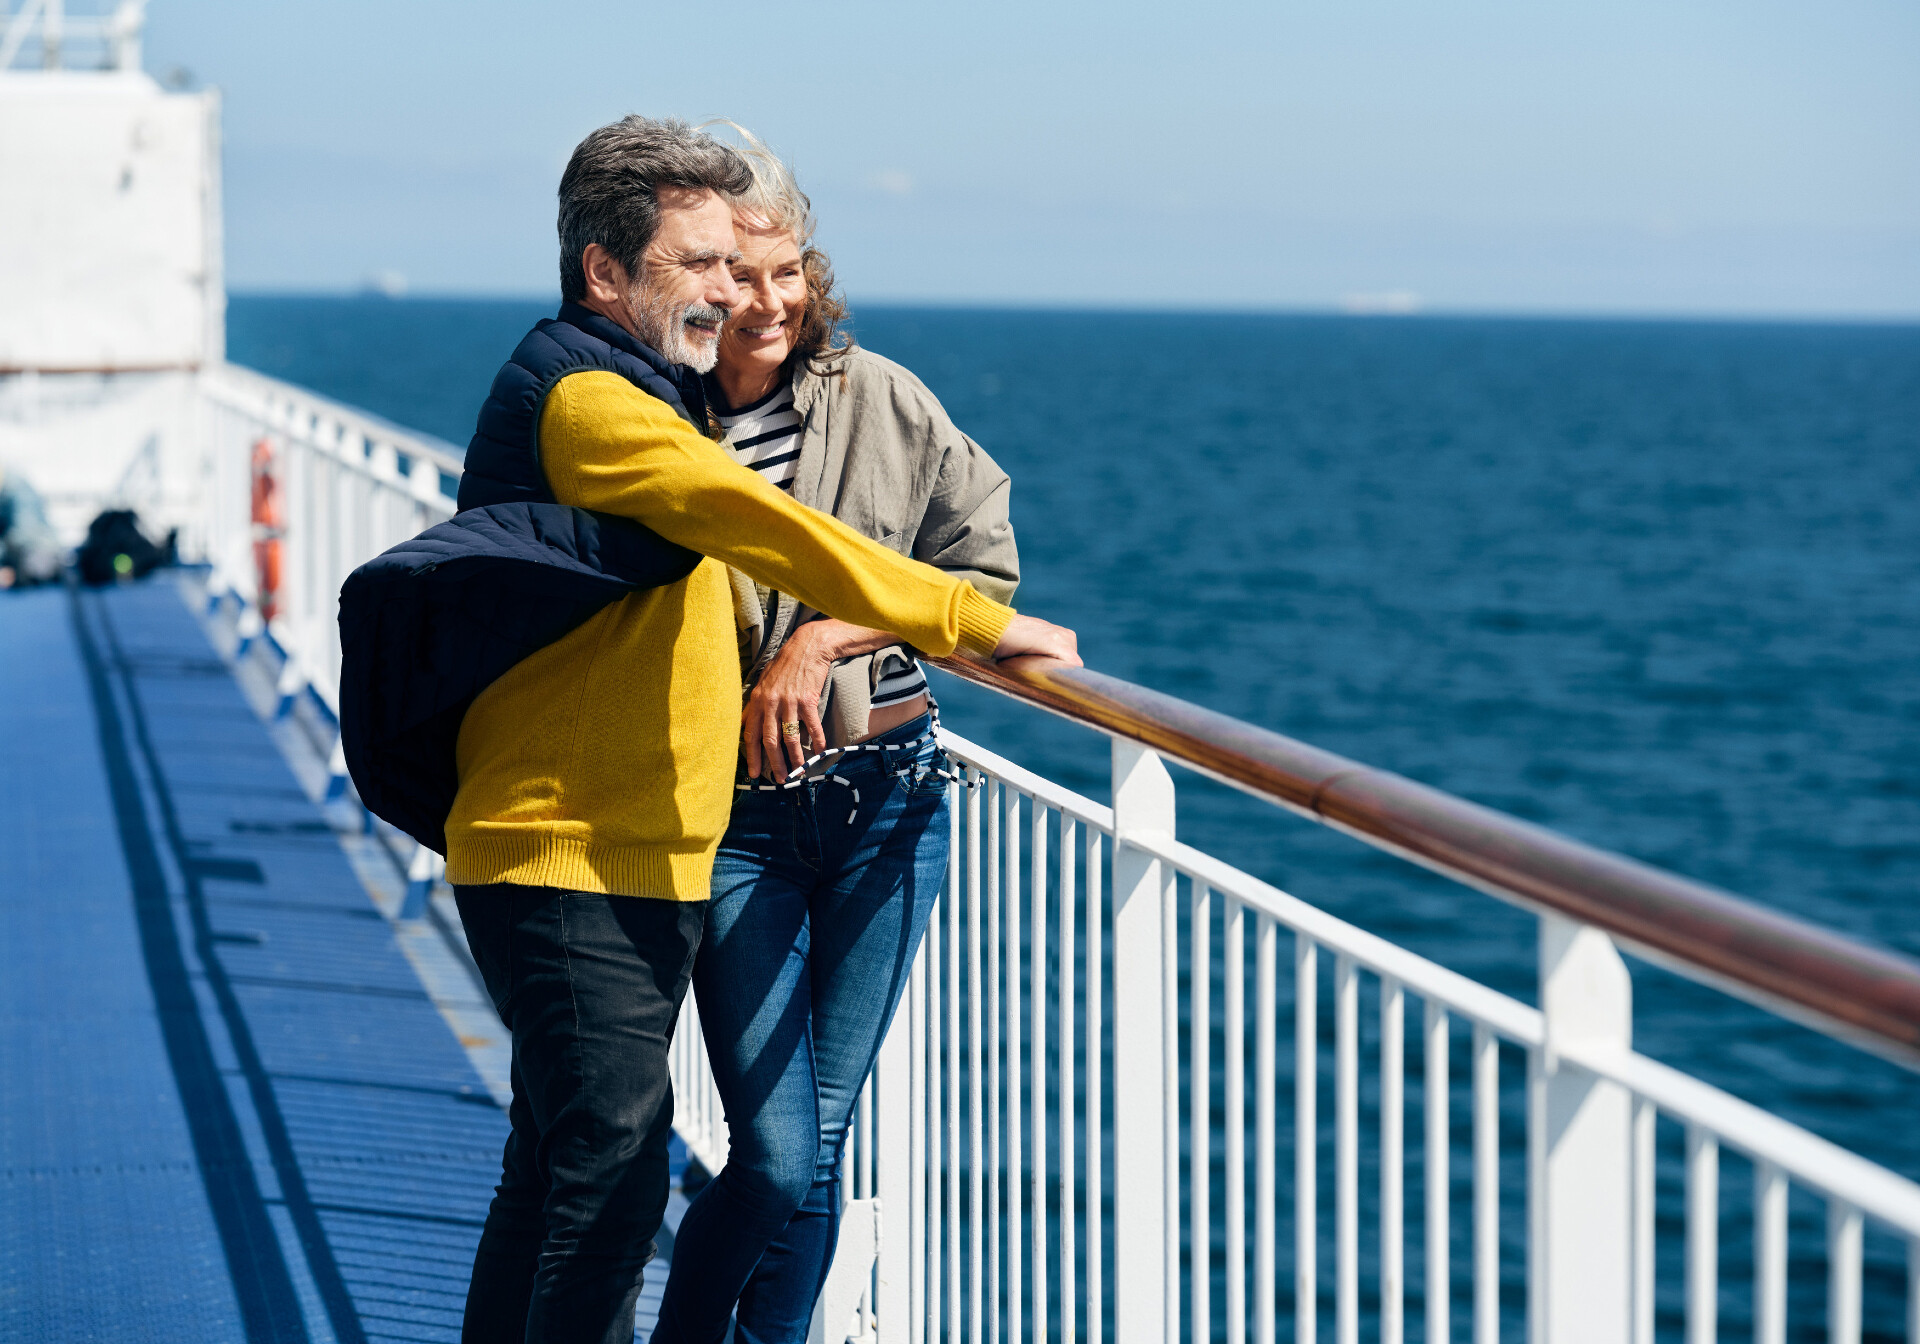 Couple On Sundeck of the Scandlines ferry Smiling 